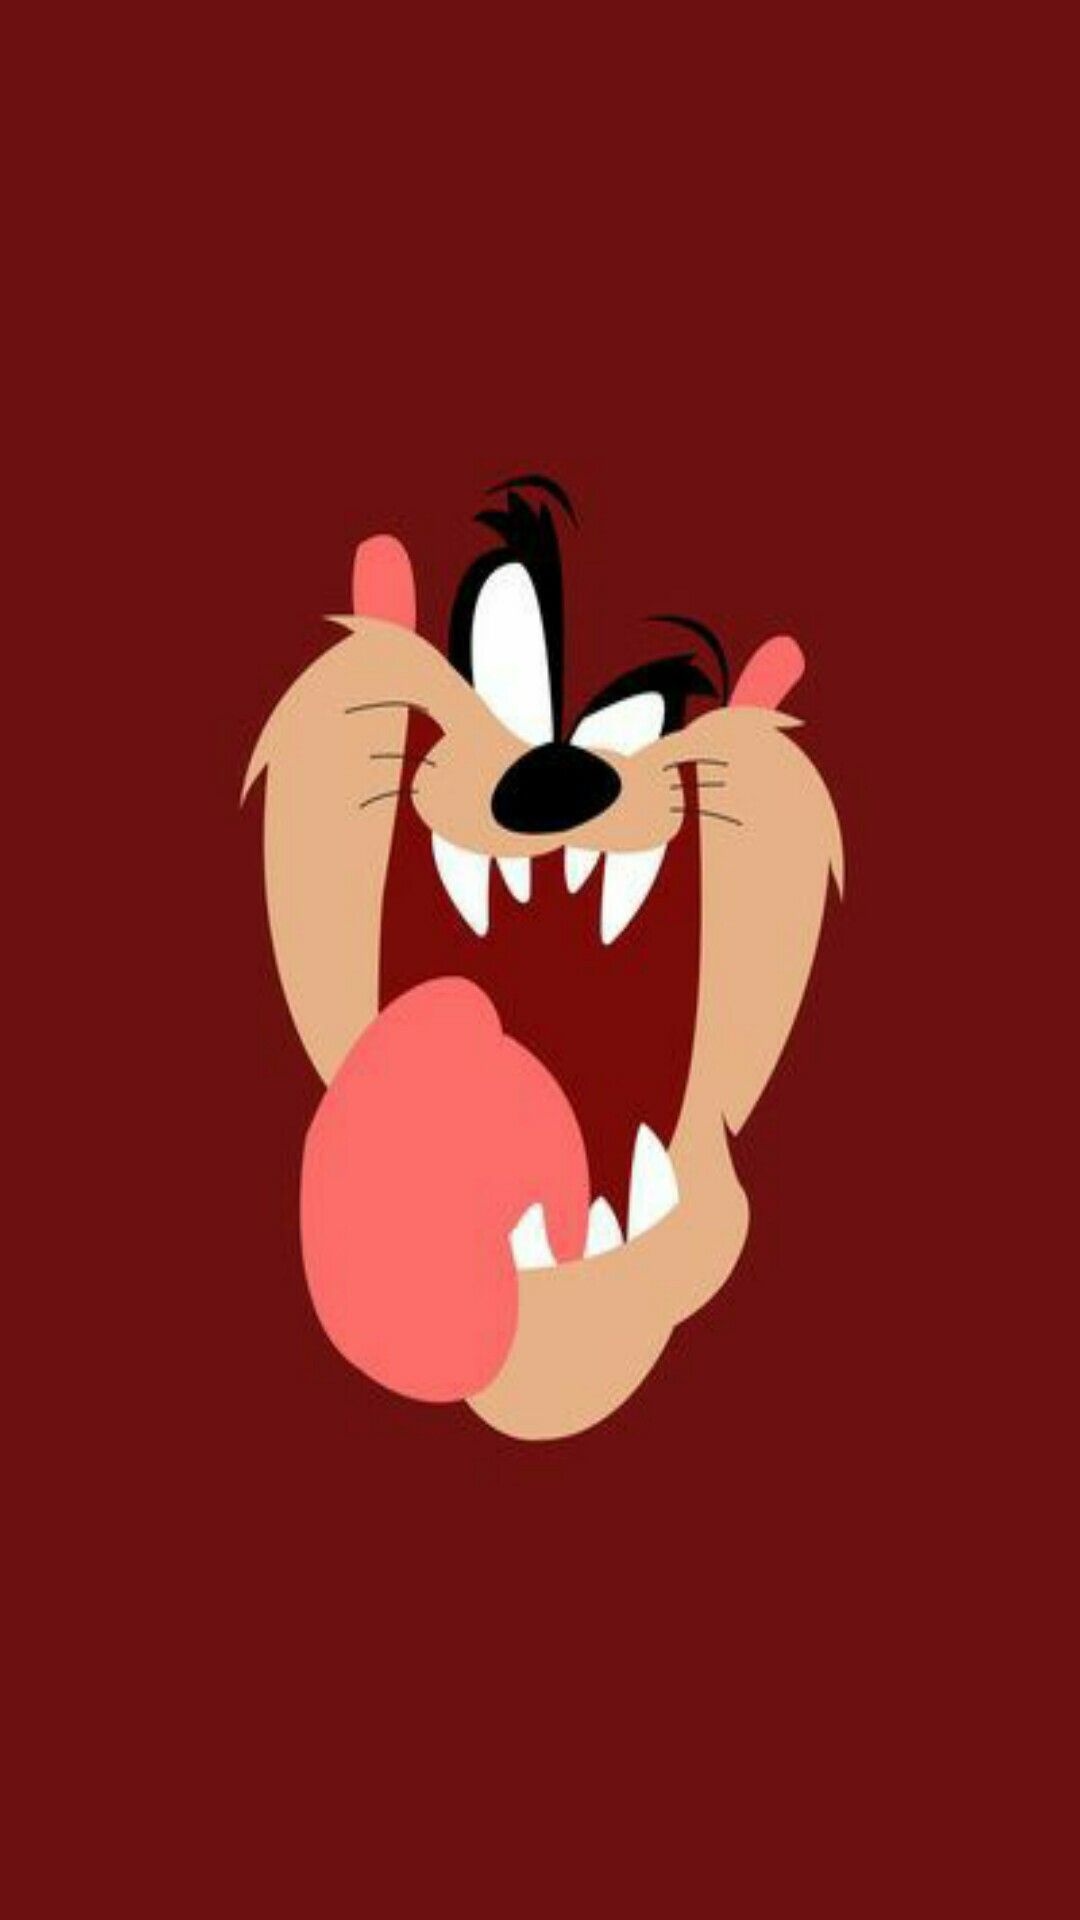 Looney Toons mobile wallpapers, Michelle Walker, Cute cartoons, Phone backgrounds, 1080x1920 Full HD Handy